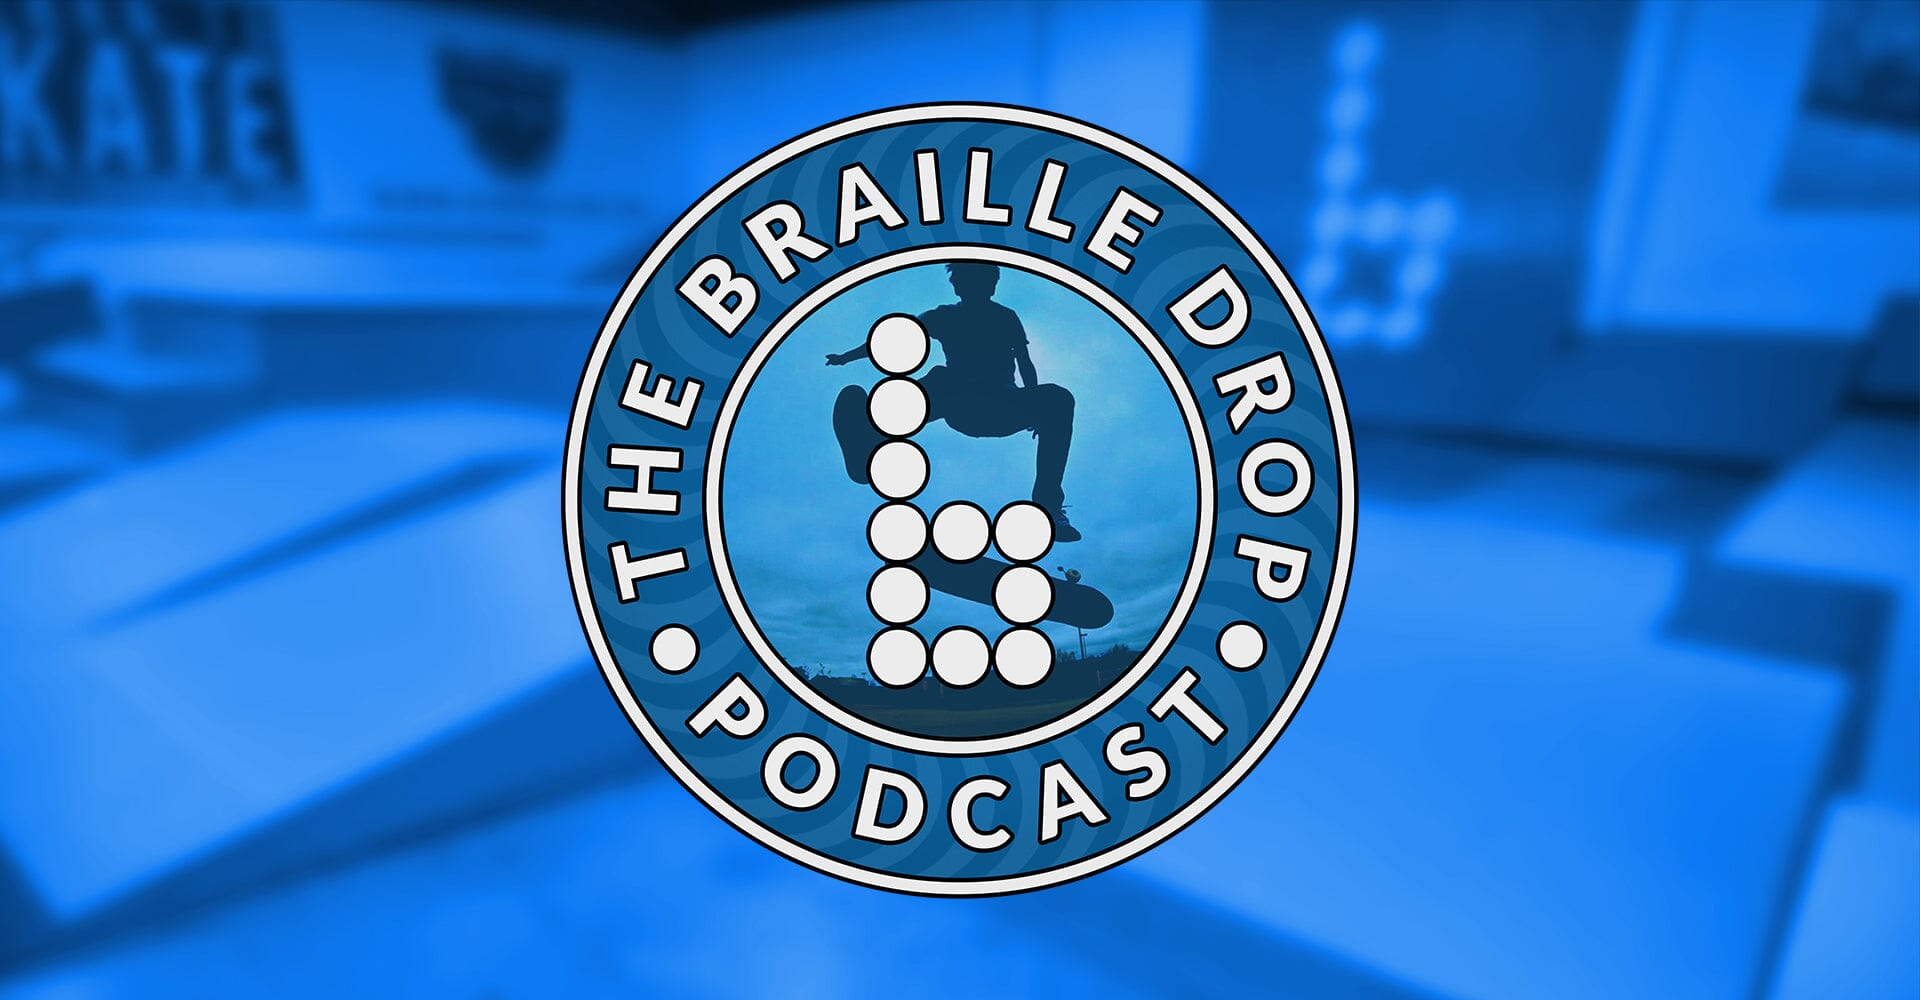 Welcome to The Braille Drop Podcast